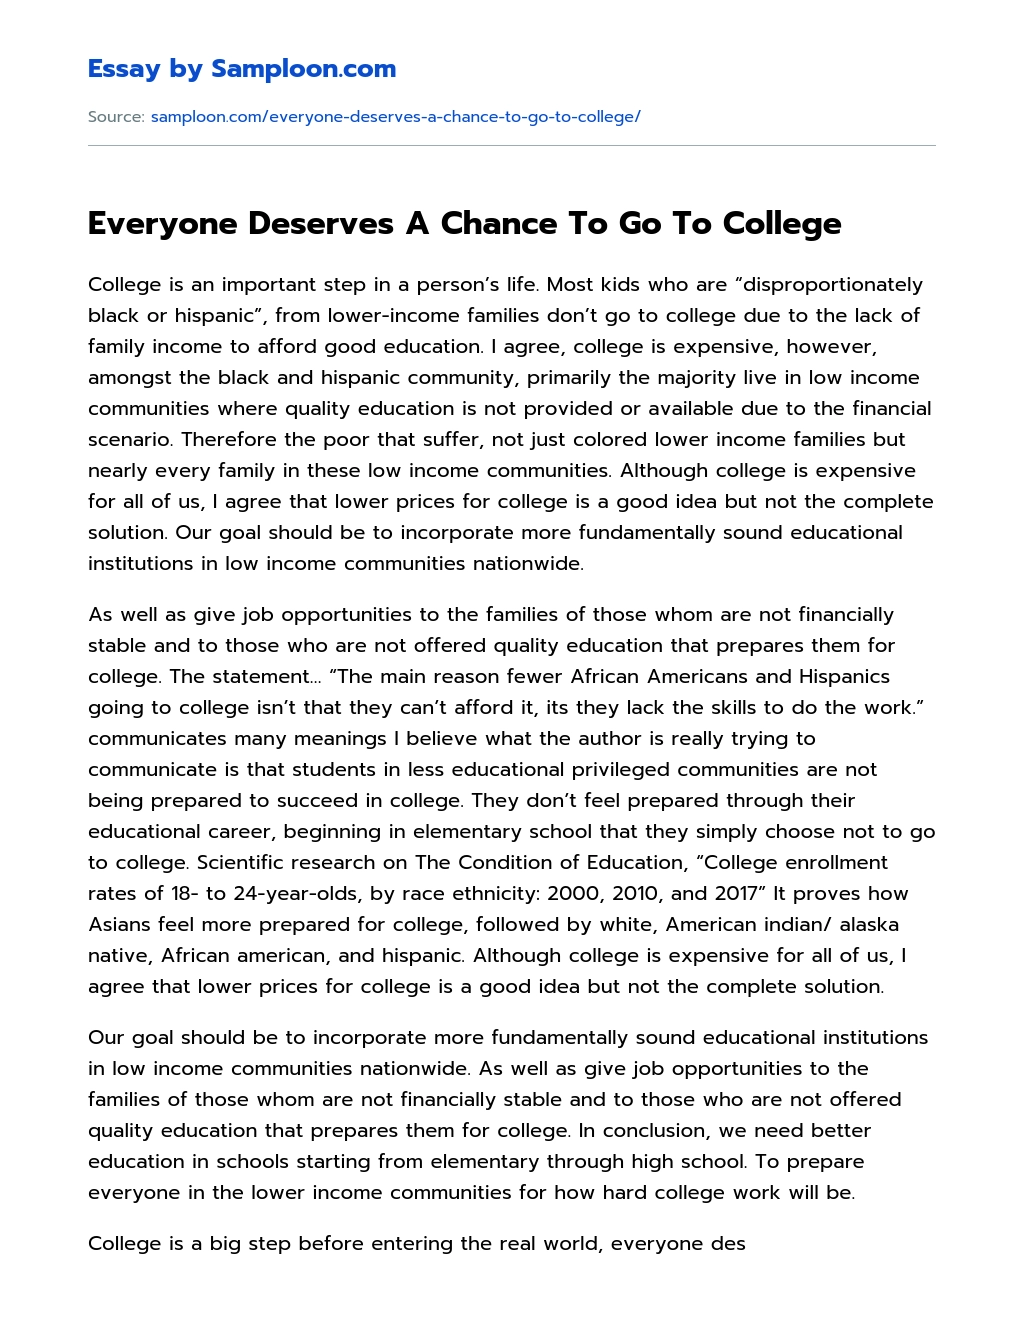 Everyone Deserves A Chance To Go To College essay